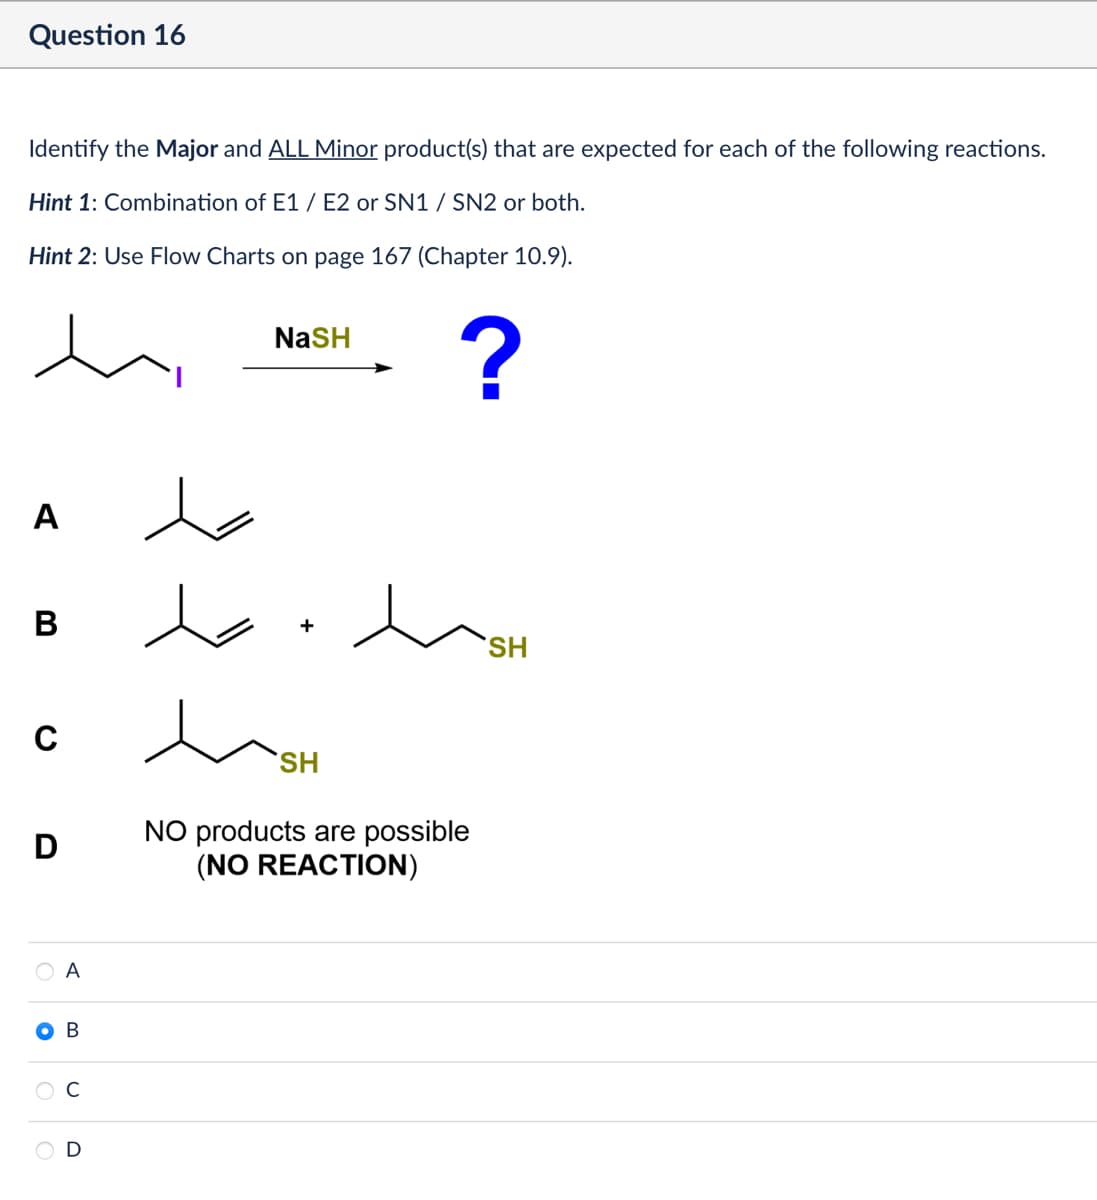 Question 16
Identify the Major and ALL Minor product(s) that are expected for each of the following reactions.
Hint 1: Combination of E1/E2 or SN1 / SN2 or both.
Hint 2: Use Flow Charts on page 167 (Chapter 10.9).
NaSH
?
SH
A
B
C
D
人
+
Дон
SH
NO products are possible
(NO REACTION)
○ A
B
D